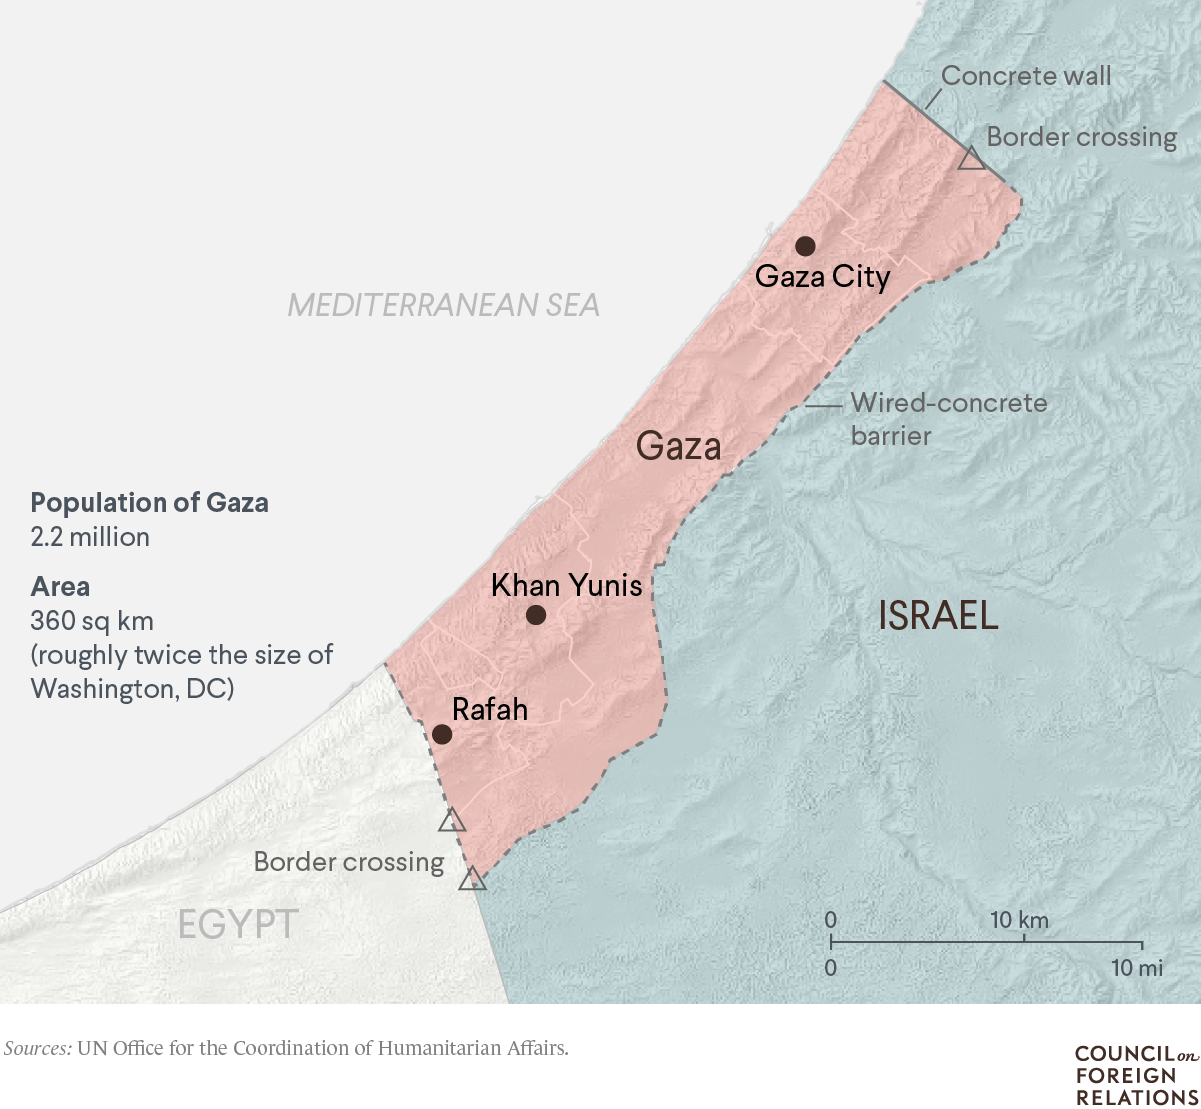 A Gaza map showing major cities, border crossings and data on population size and total area